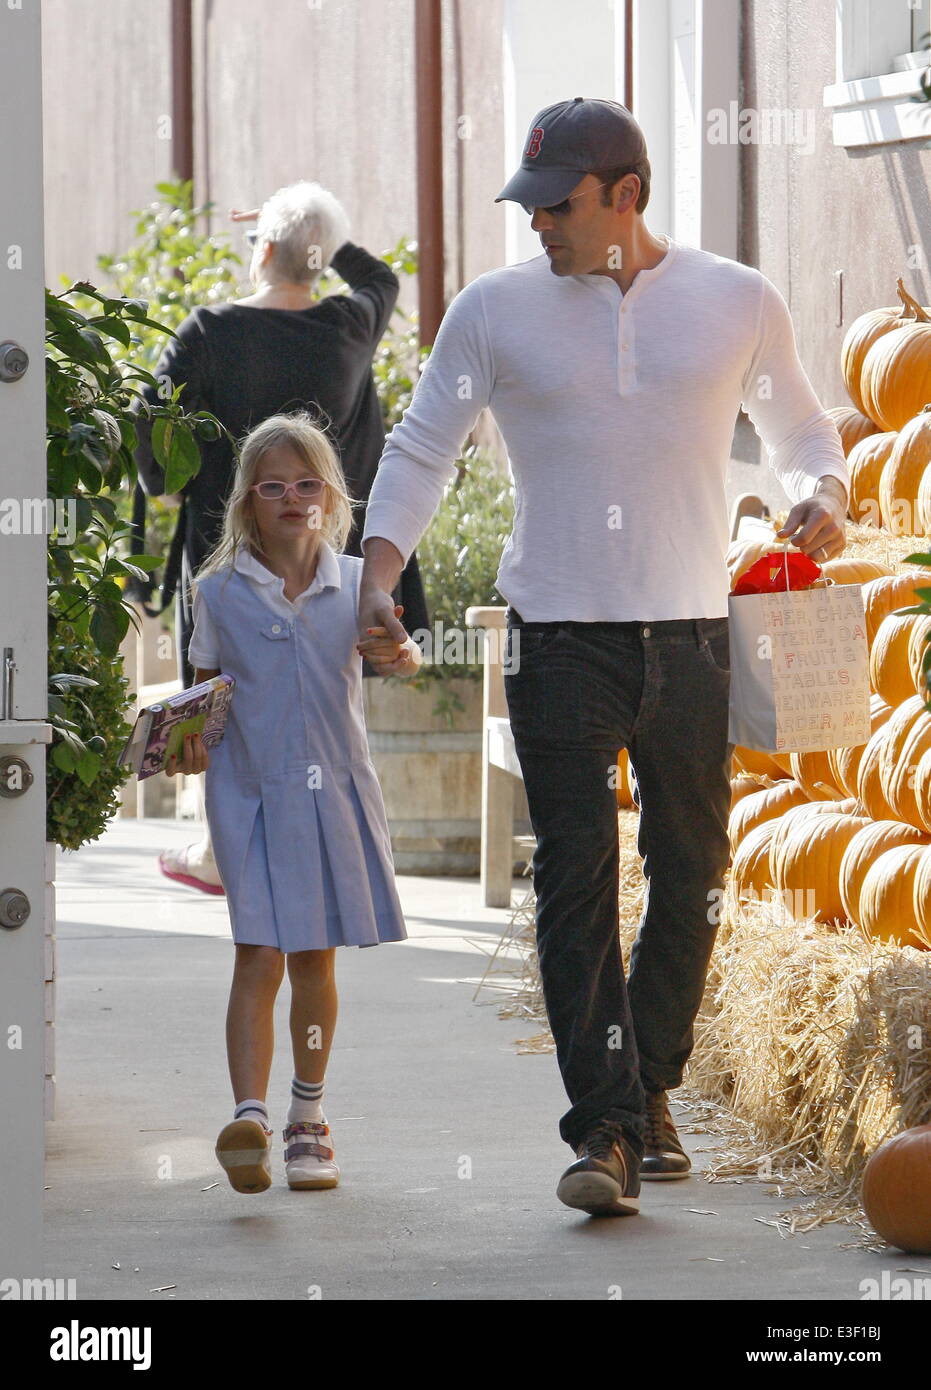 Ben Affleck wearing a tight fitting white shirt at Brentwood Country Mart with his daughter Violet  Featuring: Ben Affleck,Violet Affleck Where: Los Angeles, CA, United States When: 24 Oct 2013 Stock Photo